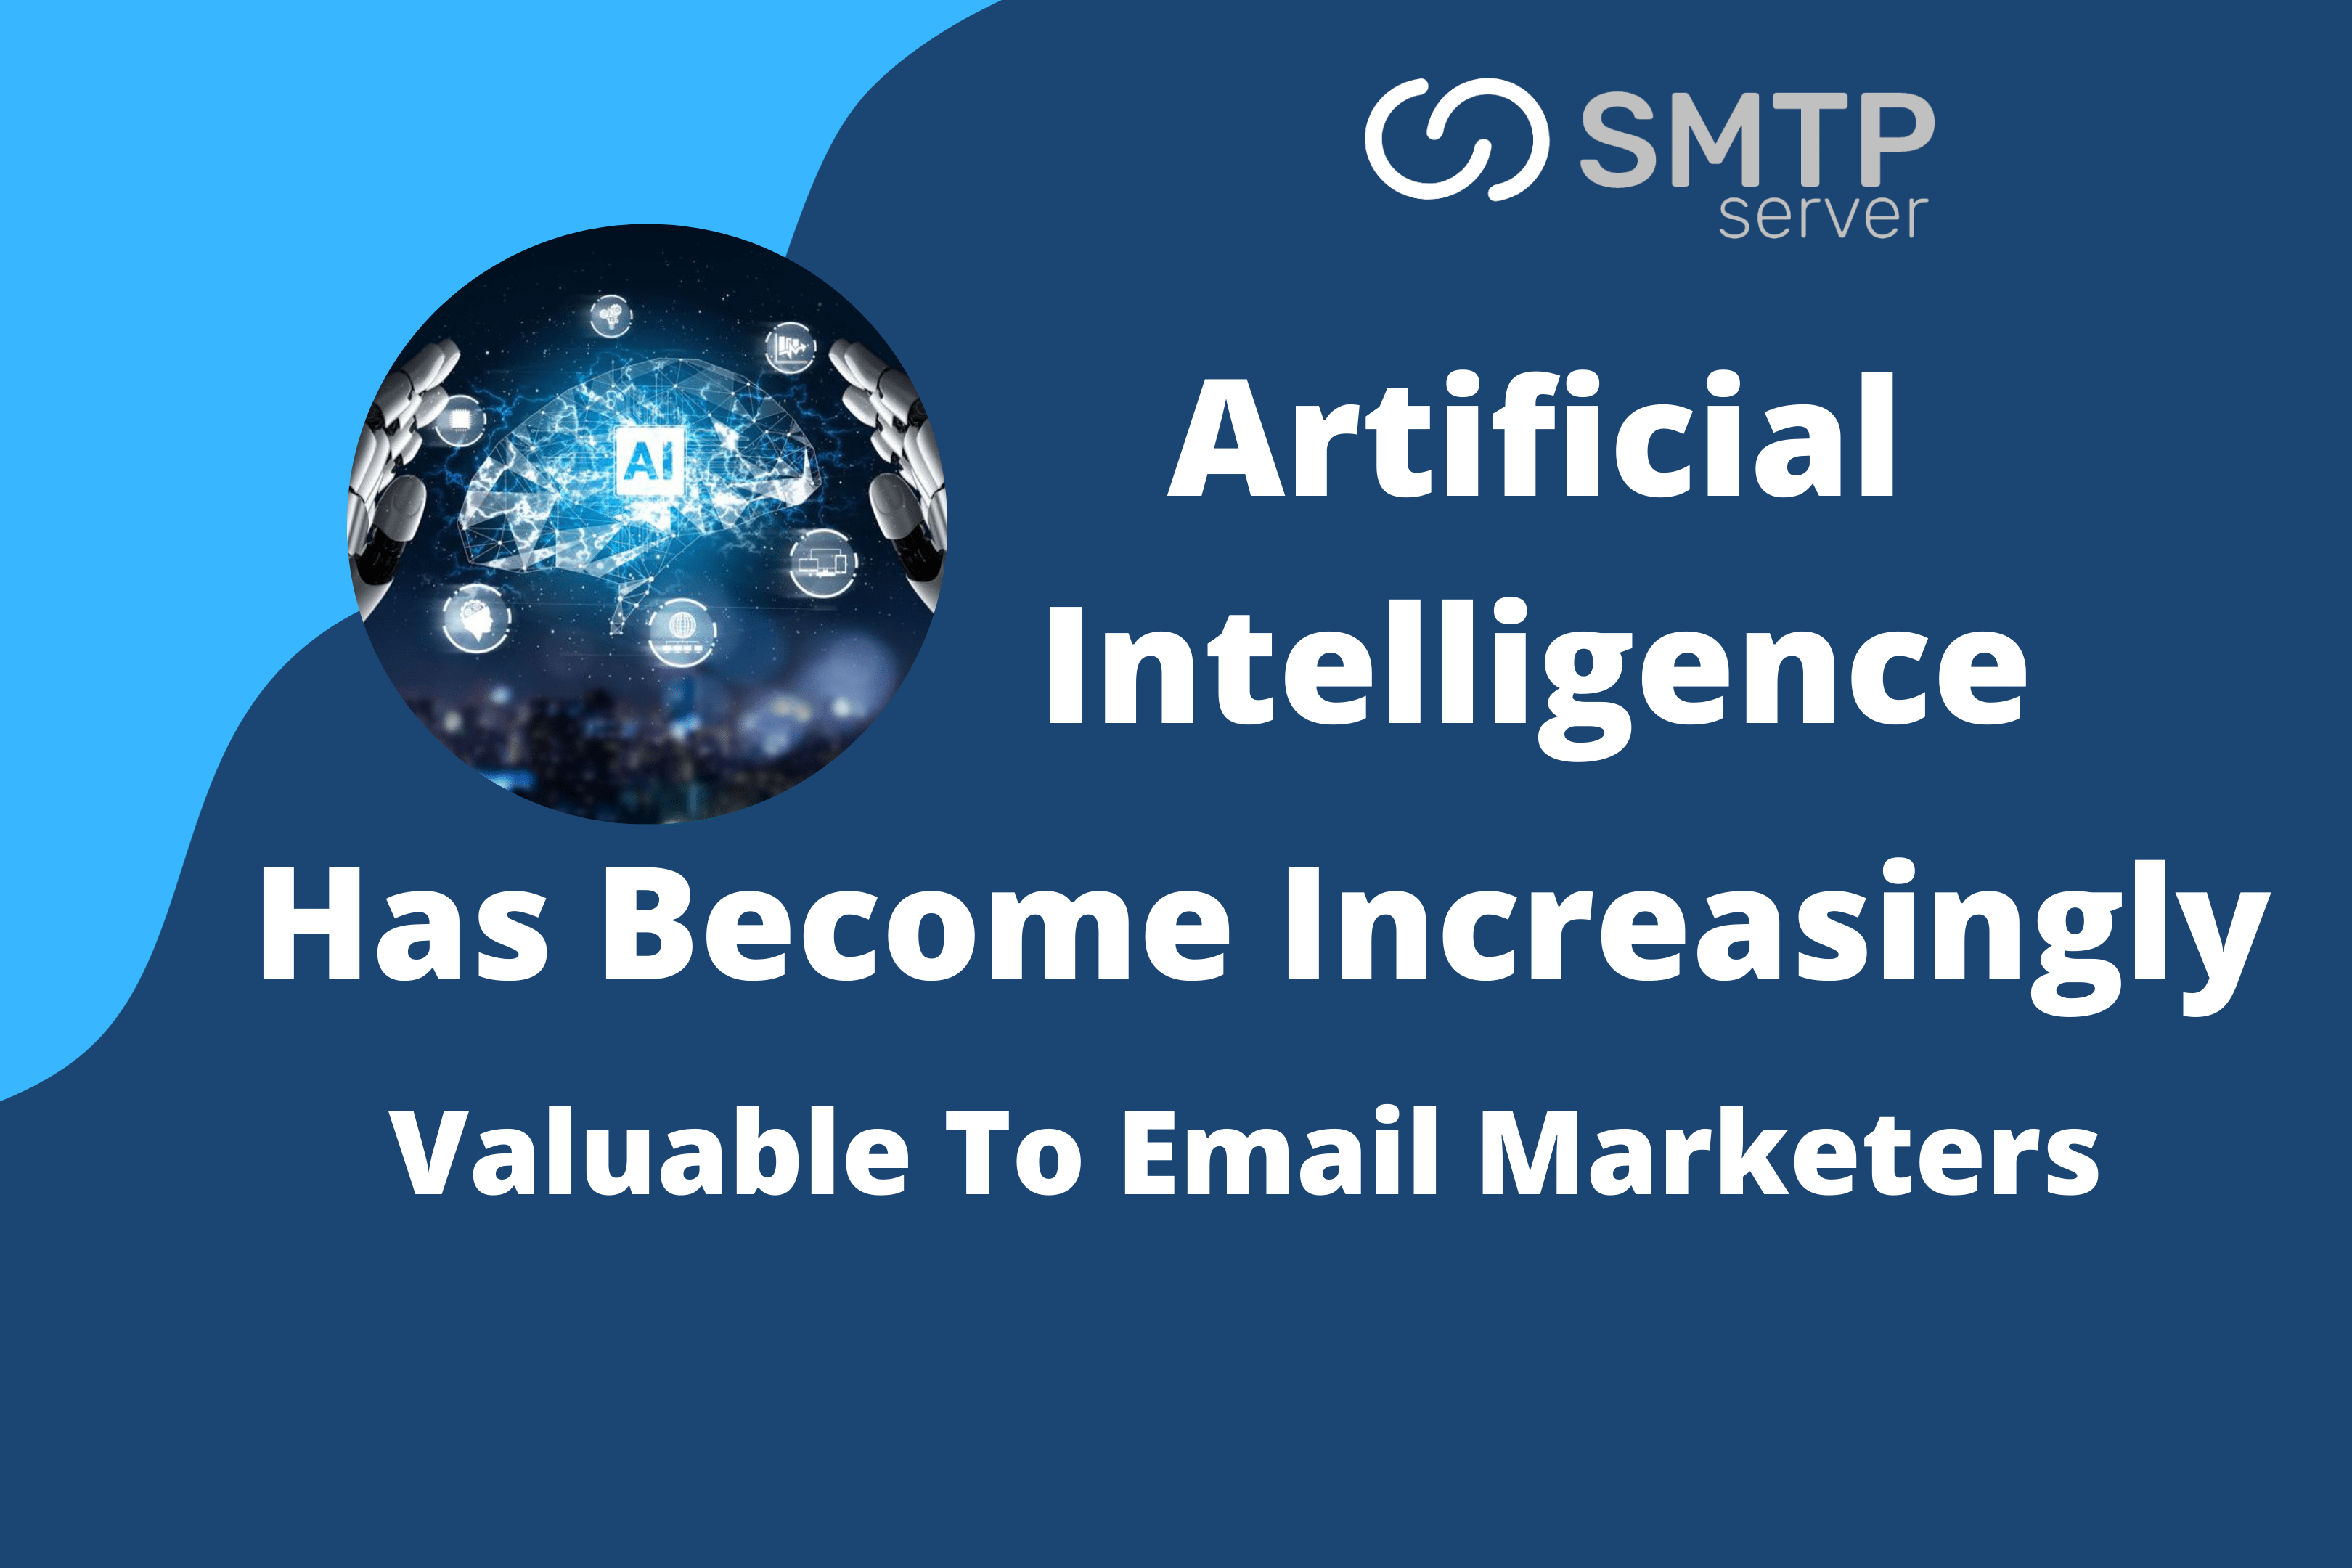 Artificial Intelligence Has Become Increasingly Valuable To Email Marketers